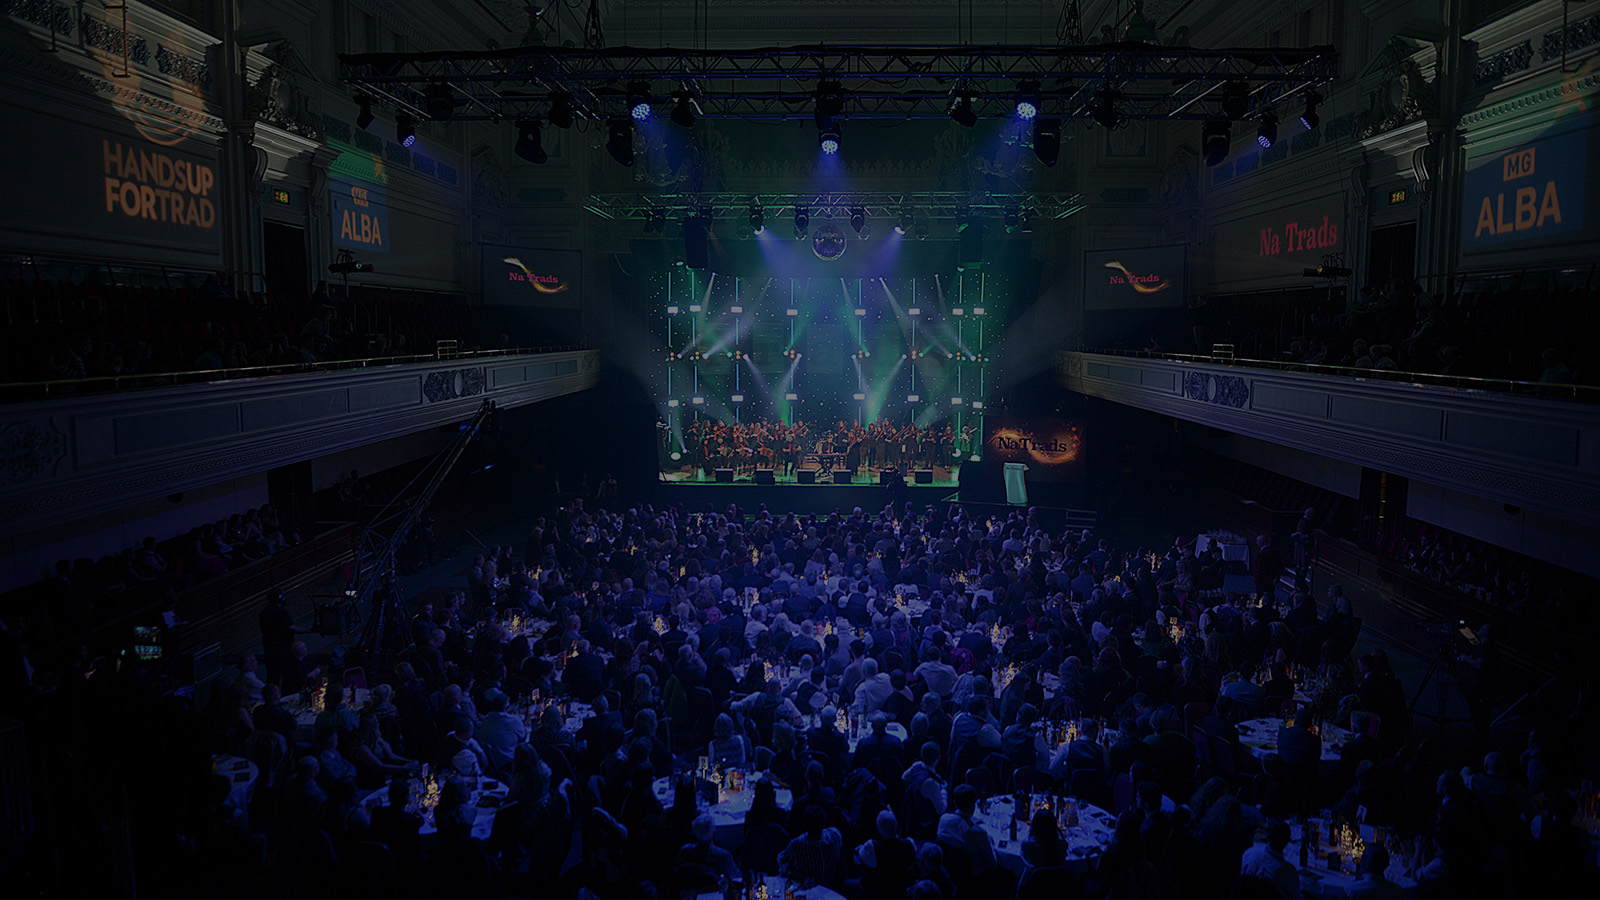 A large audience at an event, a band on stage performing, the auditorium lit in blue and white stage lights